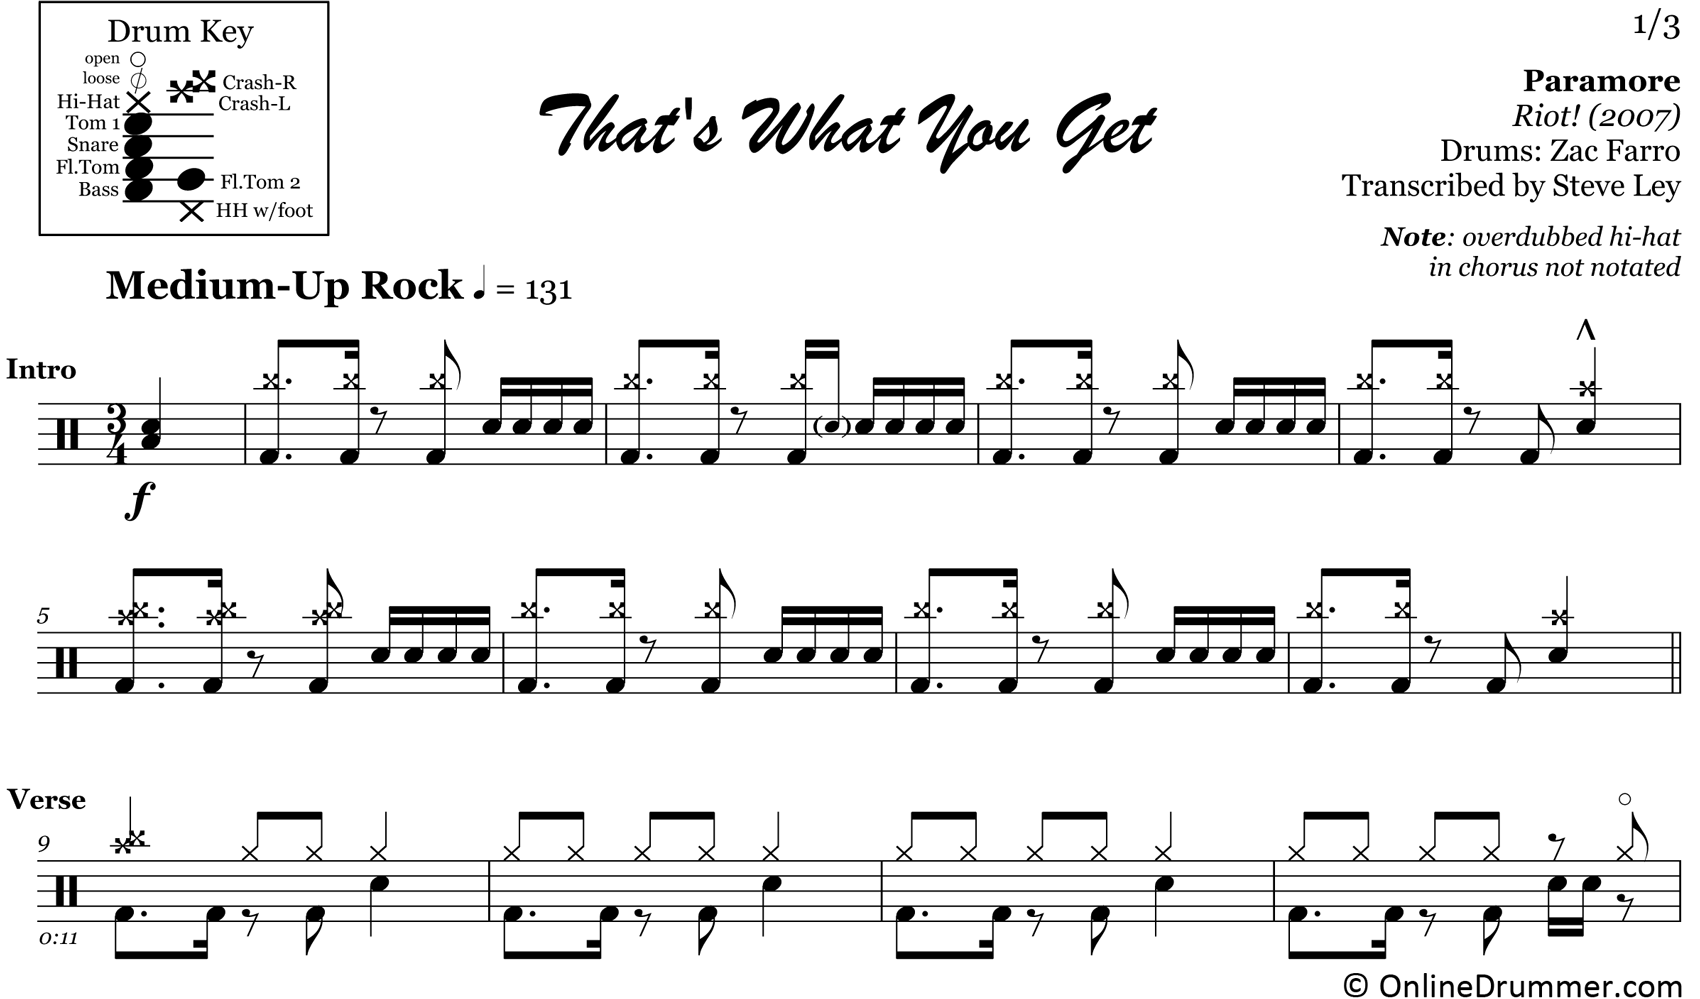 That's What You Get - Paramore - Drum Sheet Music